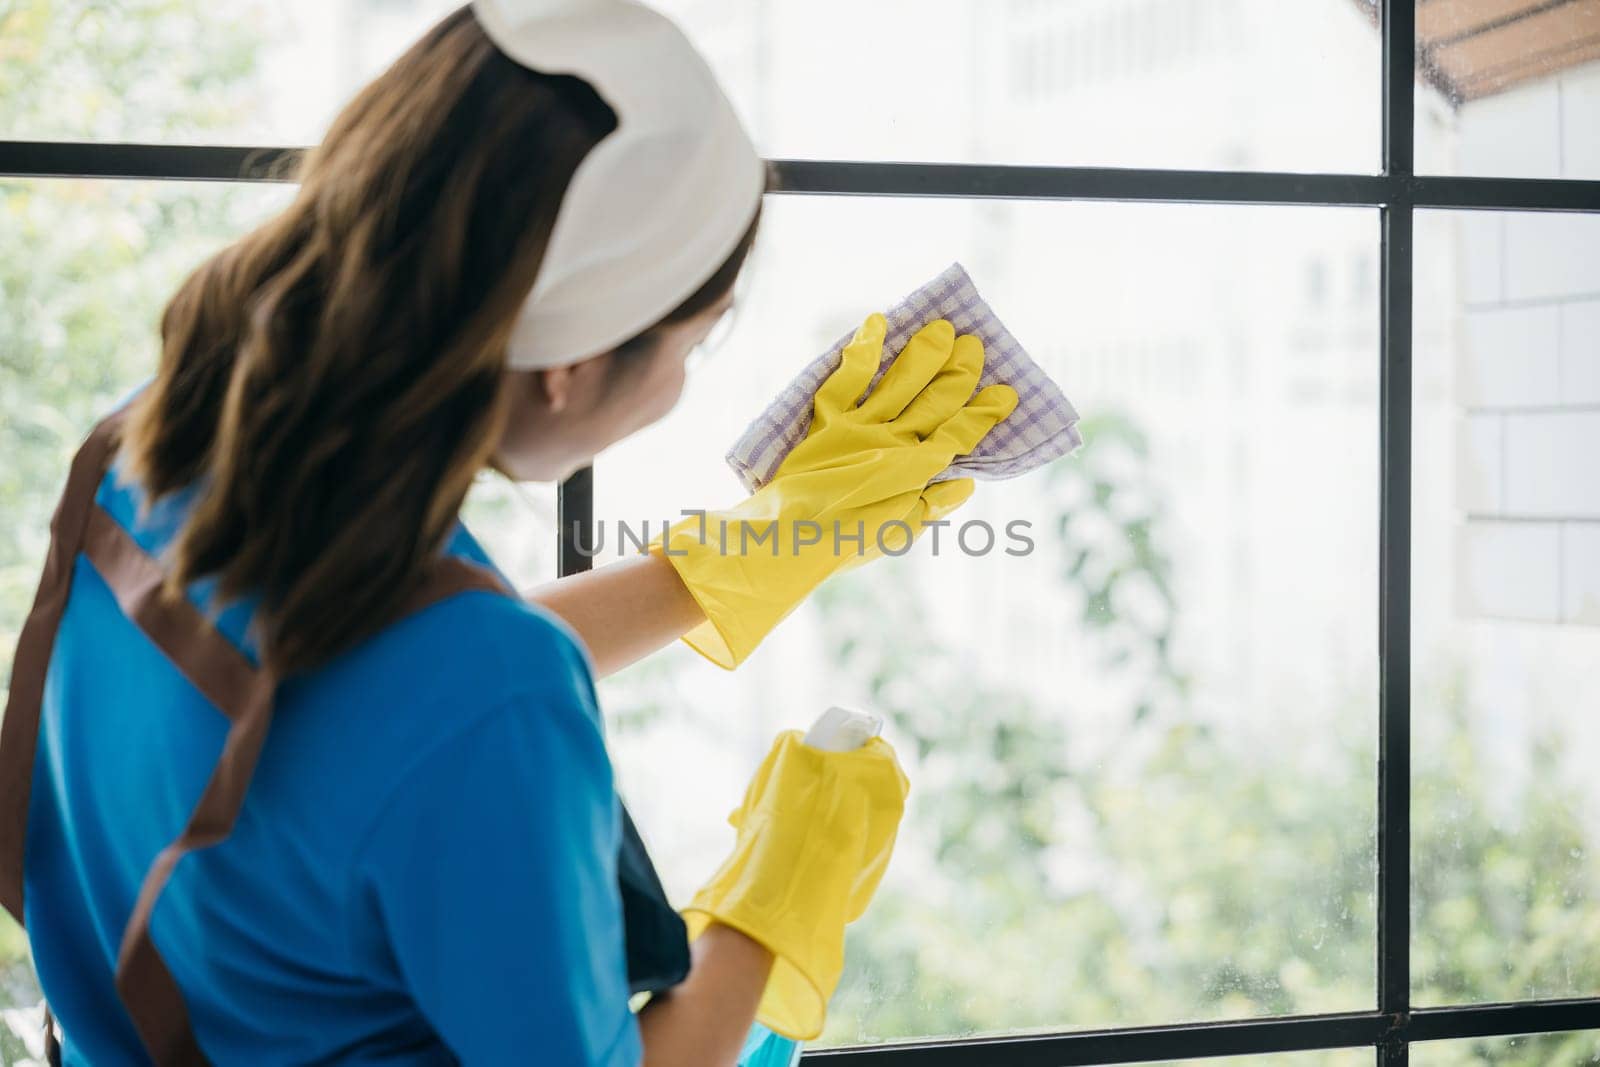 With a cheerful demeanor a young woman diligently cleans office windows using spray and cloth. Her housework emphasizes purity hygiene and transparent cleanliness.